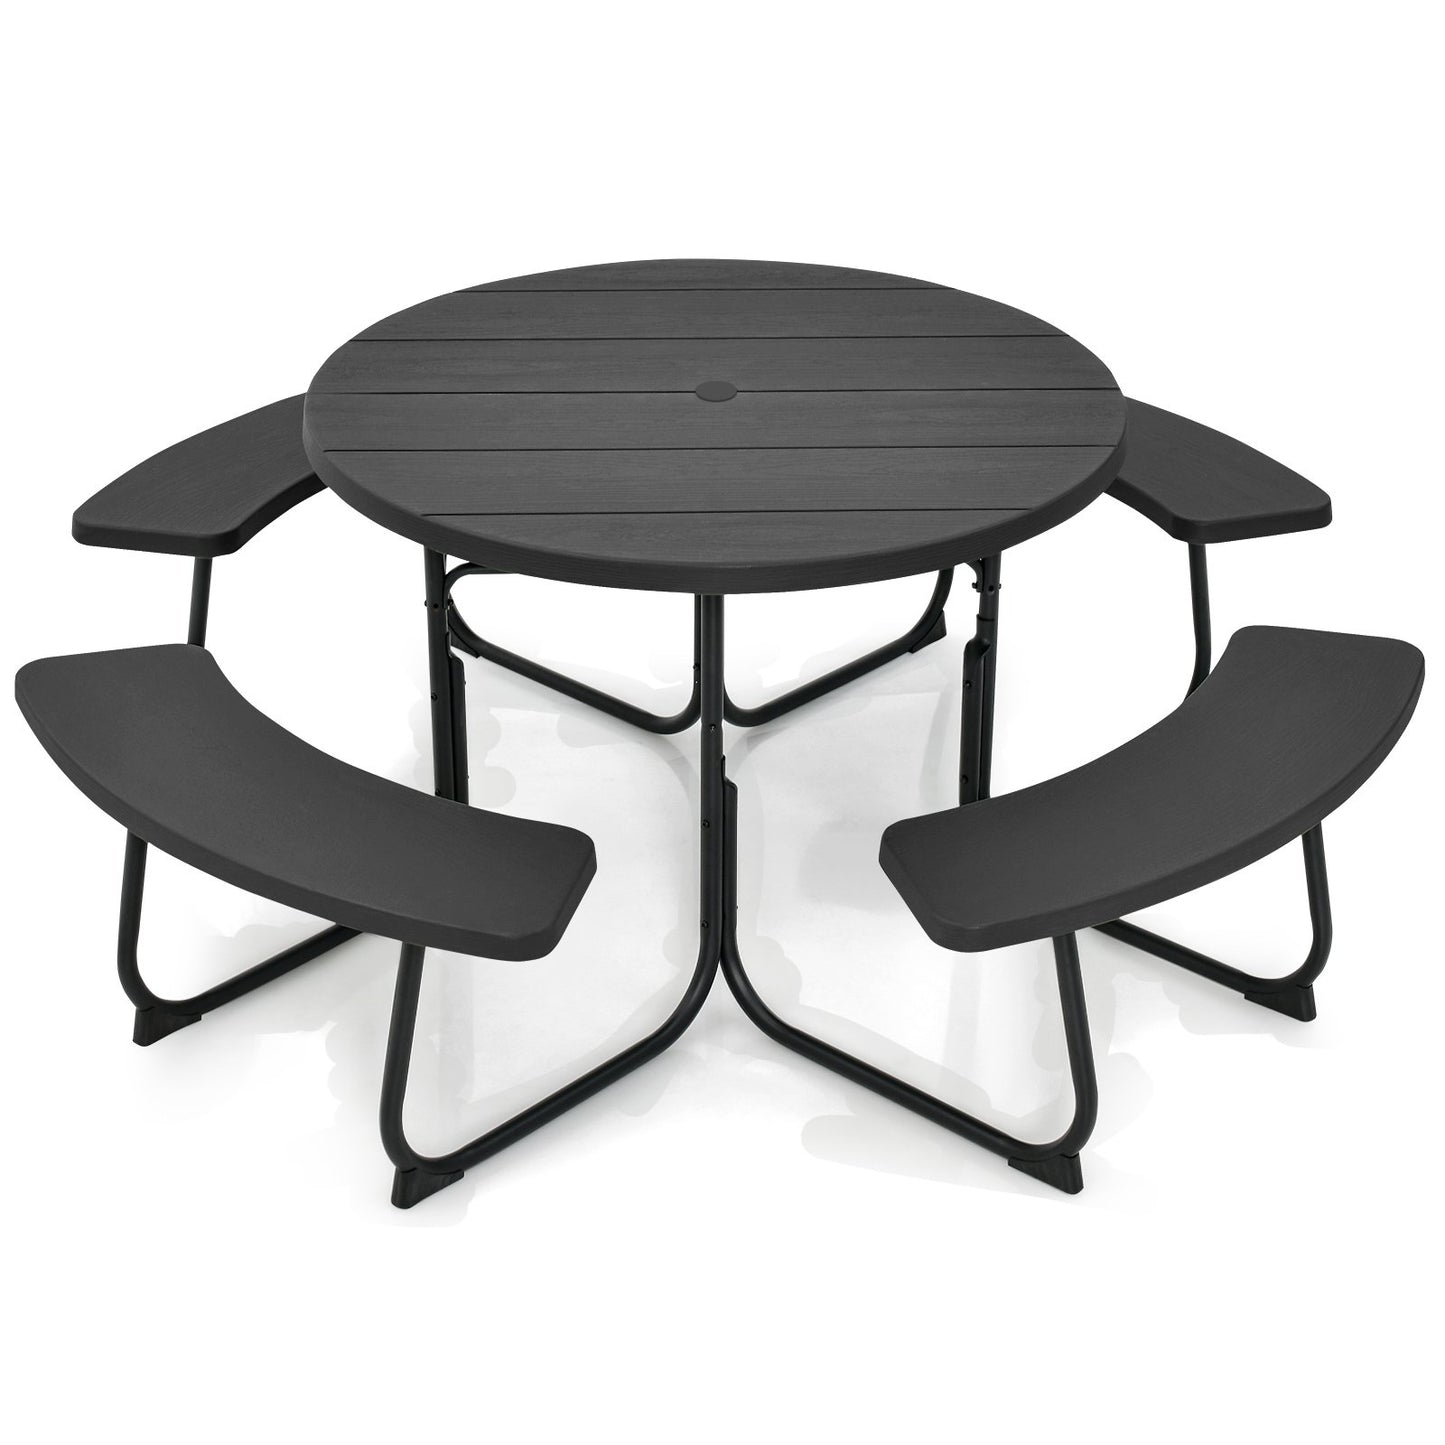 8-Person Outdoor Picnic Table and Bench Set with Umbrella Hole, Black